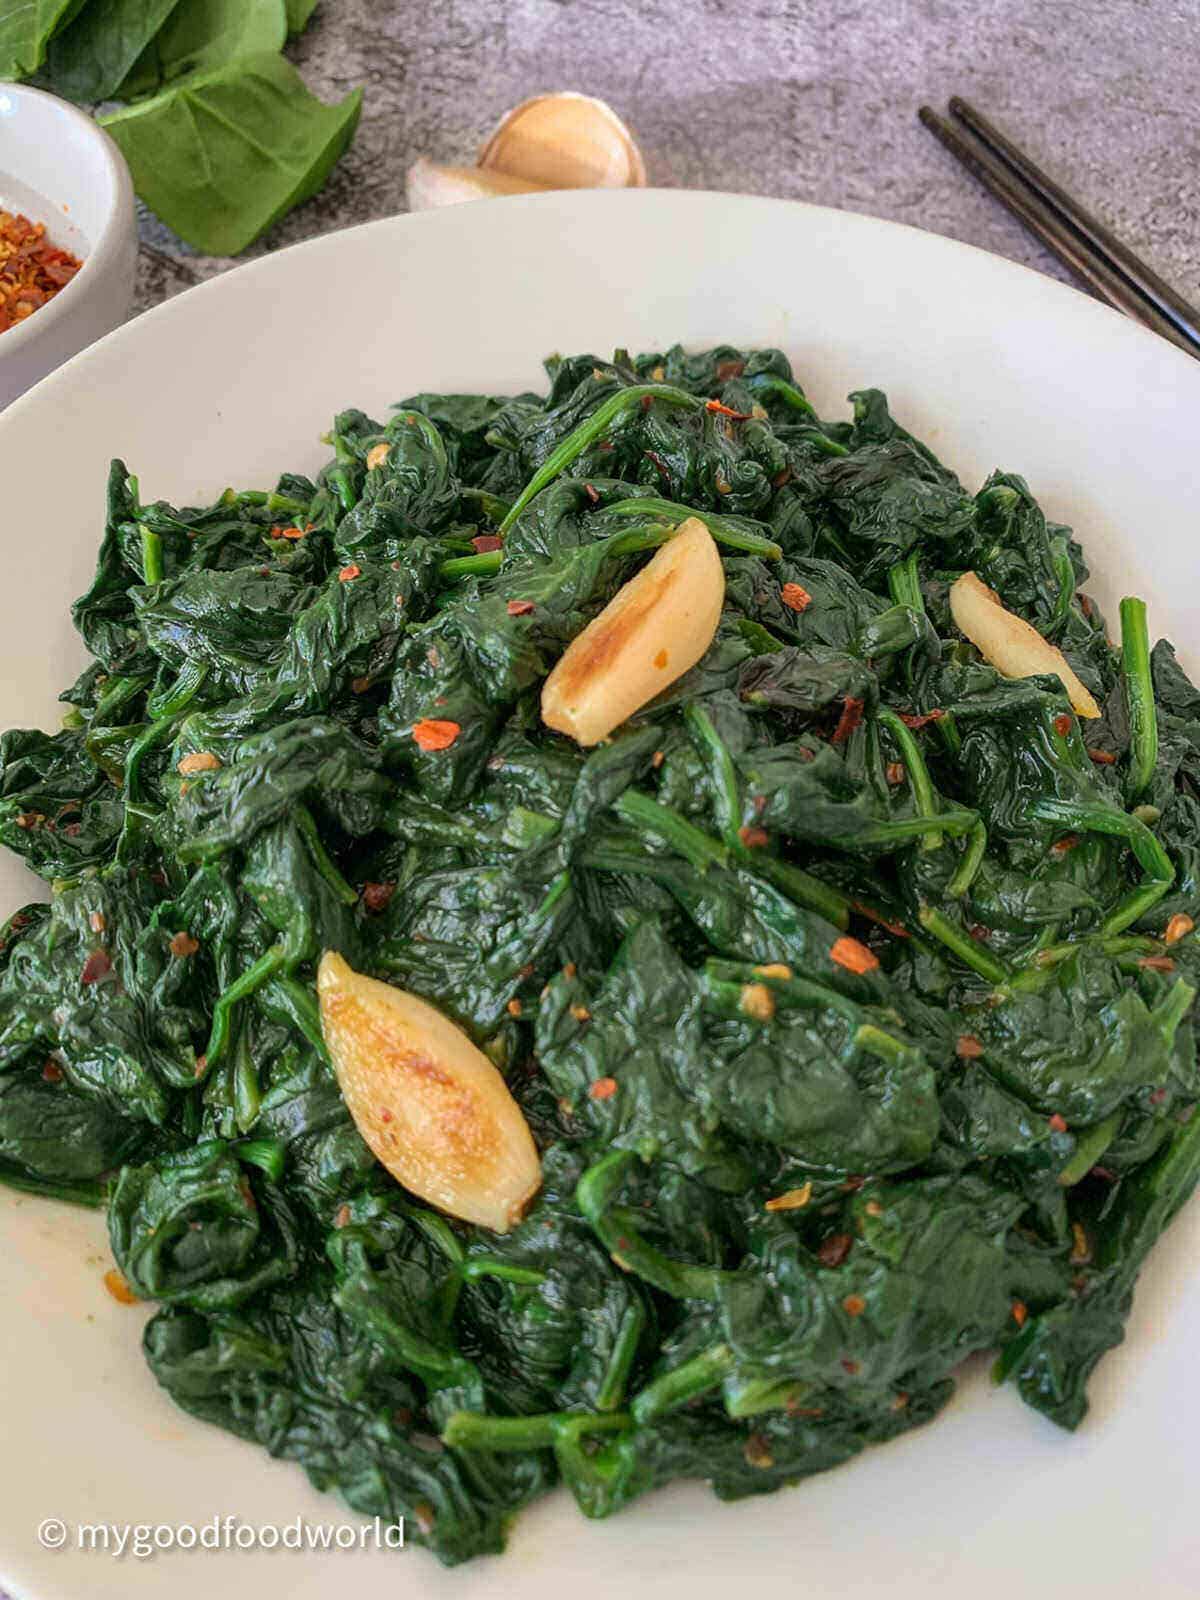 Stir fried spinach with whole garlic placed in a white bowl plate with chili flakes, chopsticks and fresh spinach leaves on the side.